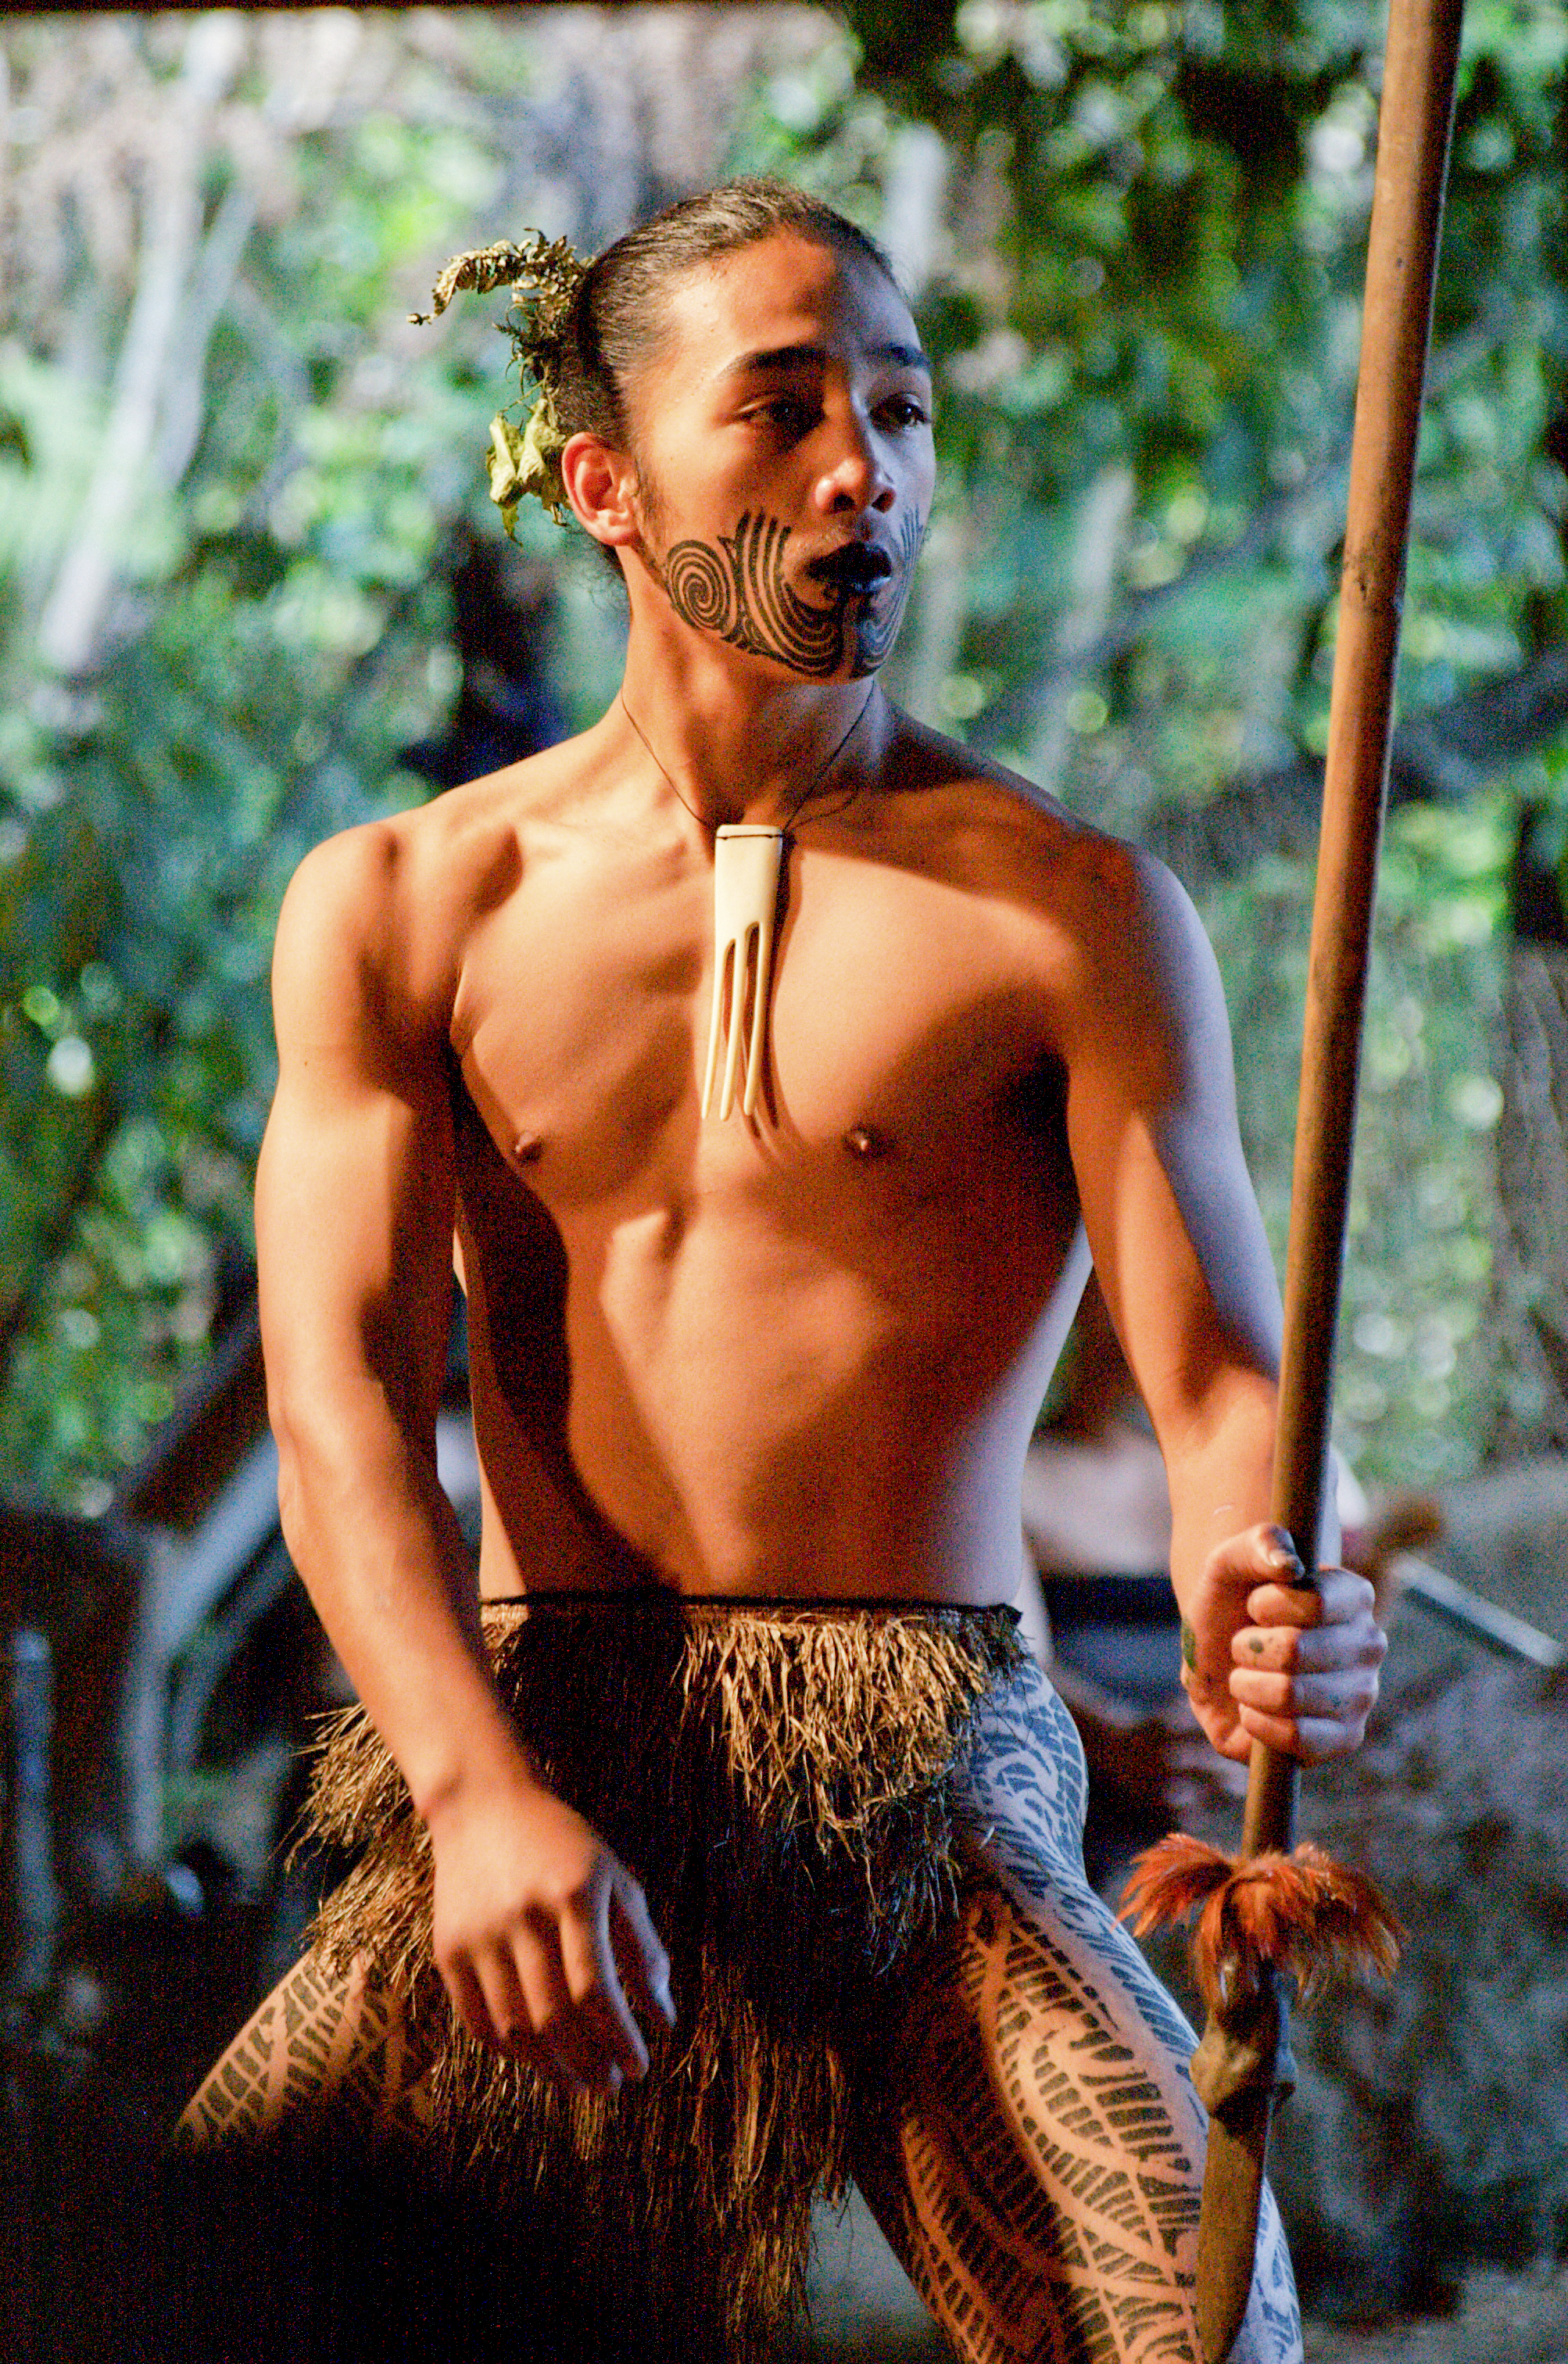 Young Maori man performing in a kapa haka group during a Maori dance troupe event in Rotorua. In his left hand is a taiaha -- a traditional close-quarters weapon of the Māori, made from either wood or whalebone and used for short, sharp strikes or stabbing thrusts with efficient footwork on the part of the wielder. Photo taken on December 30, 2006.